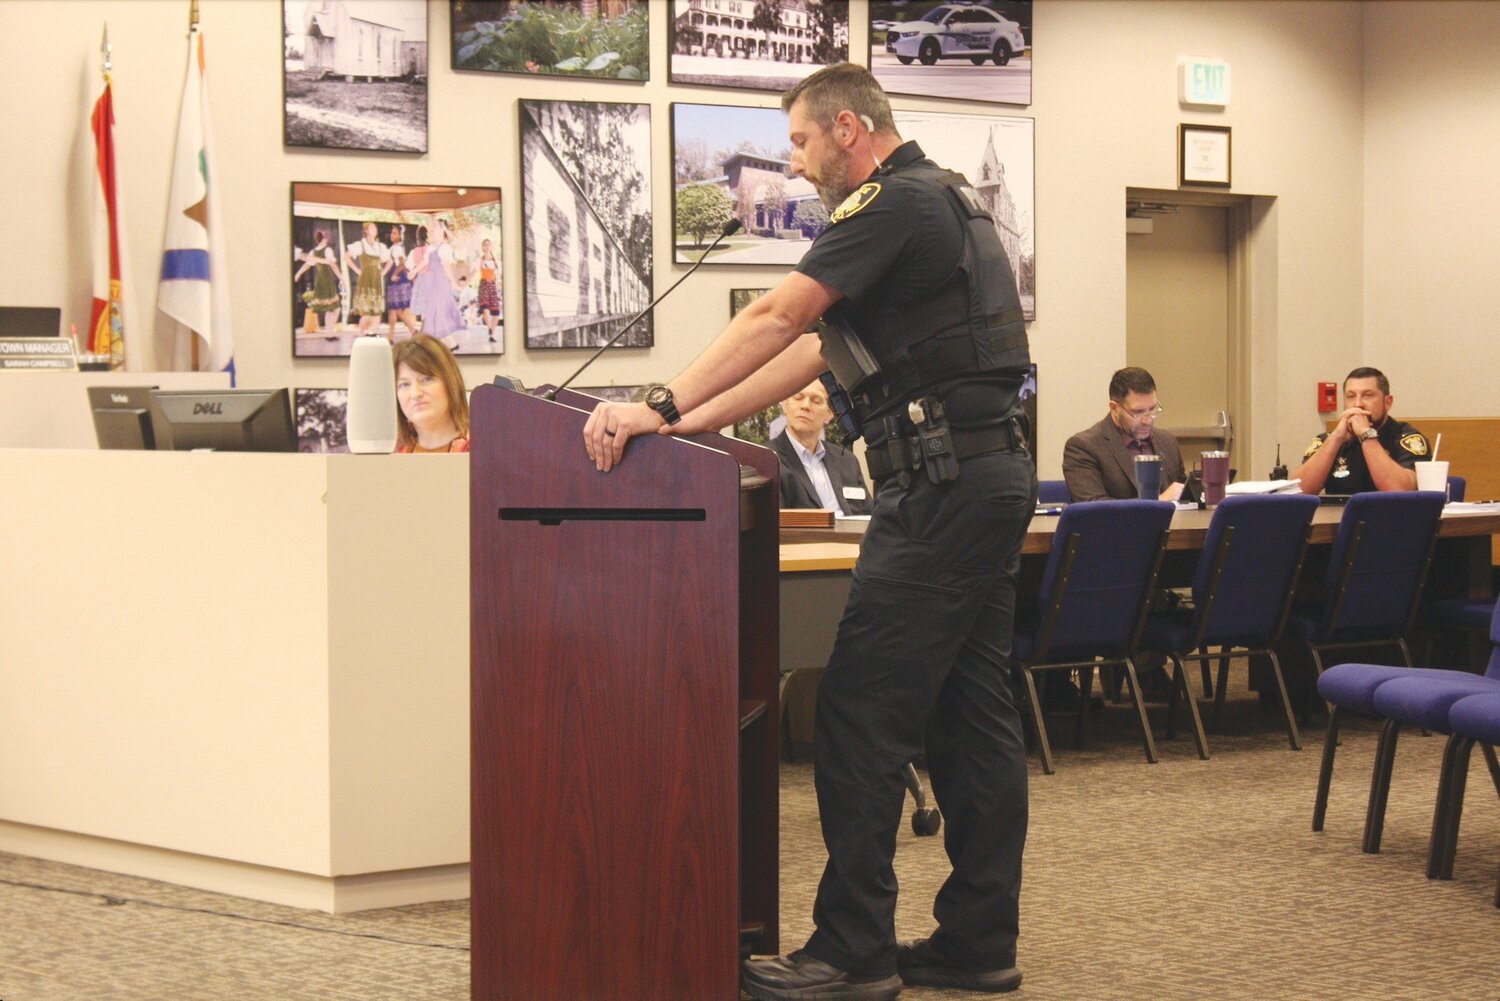 An Orange Park Police Department officer told the Town Council the agency earns less less than other law enforcement departments in surrounding areas.